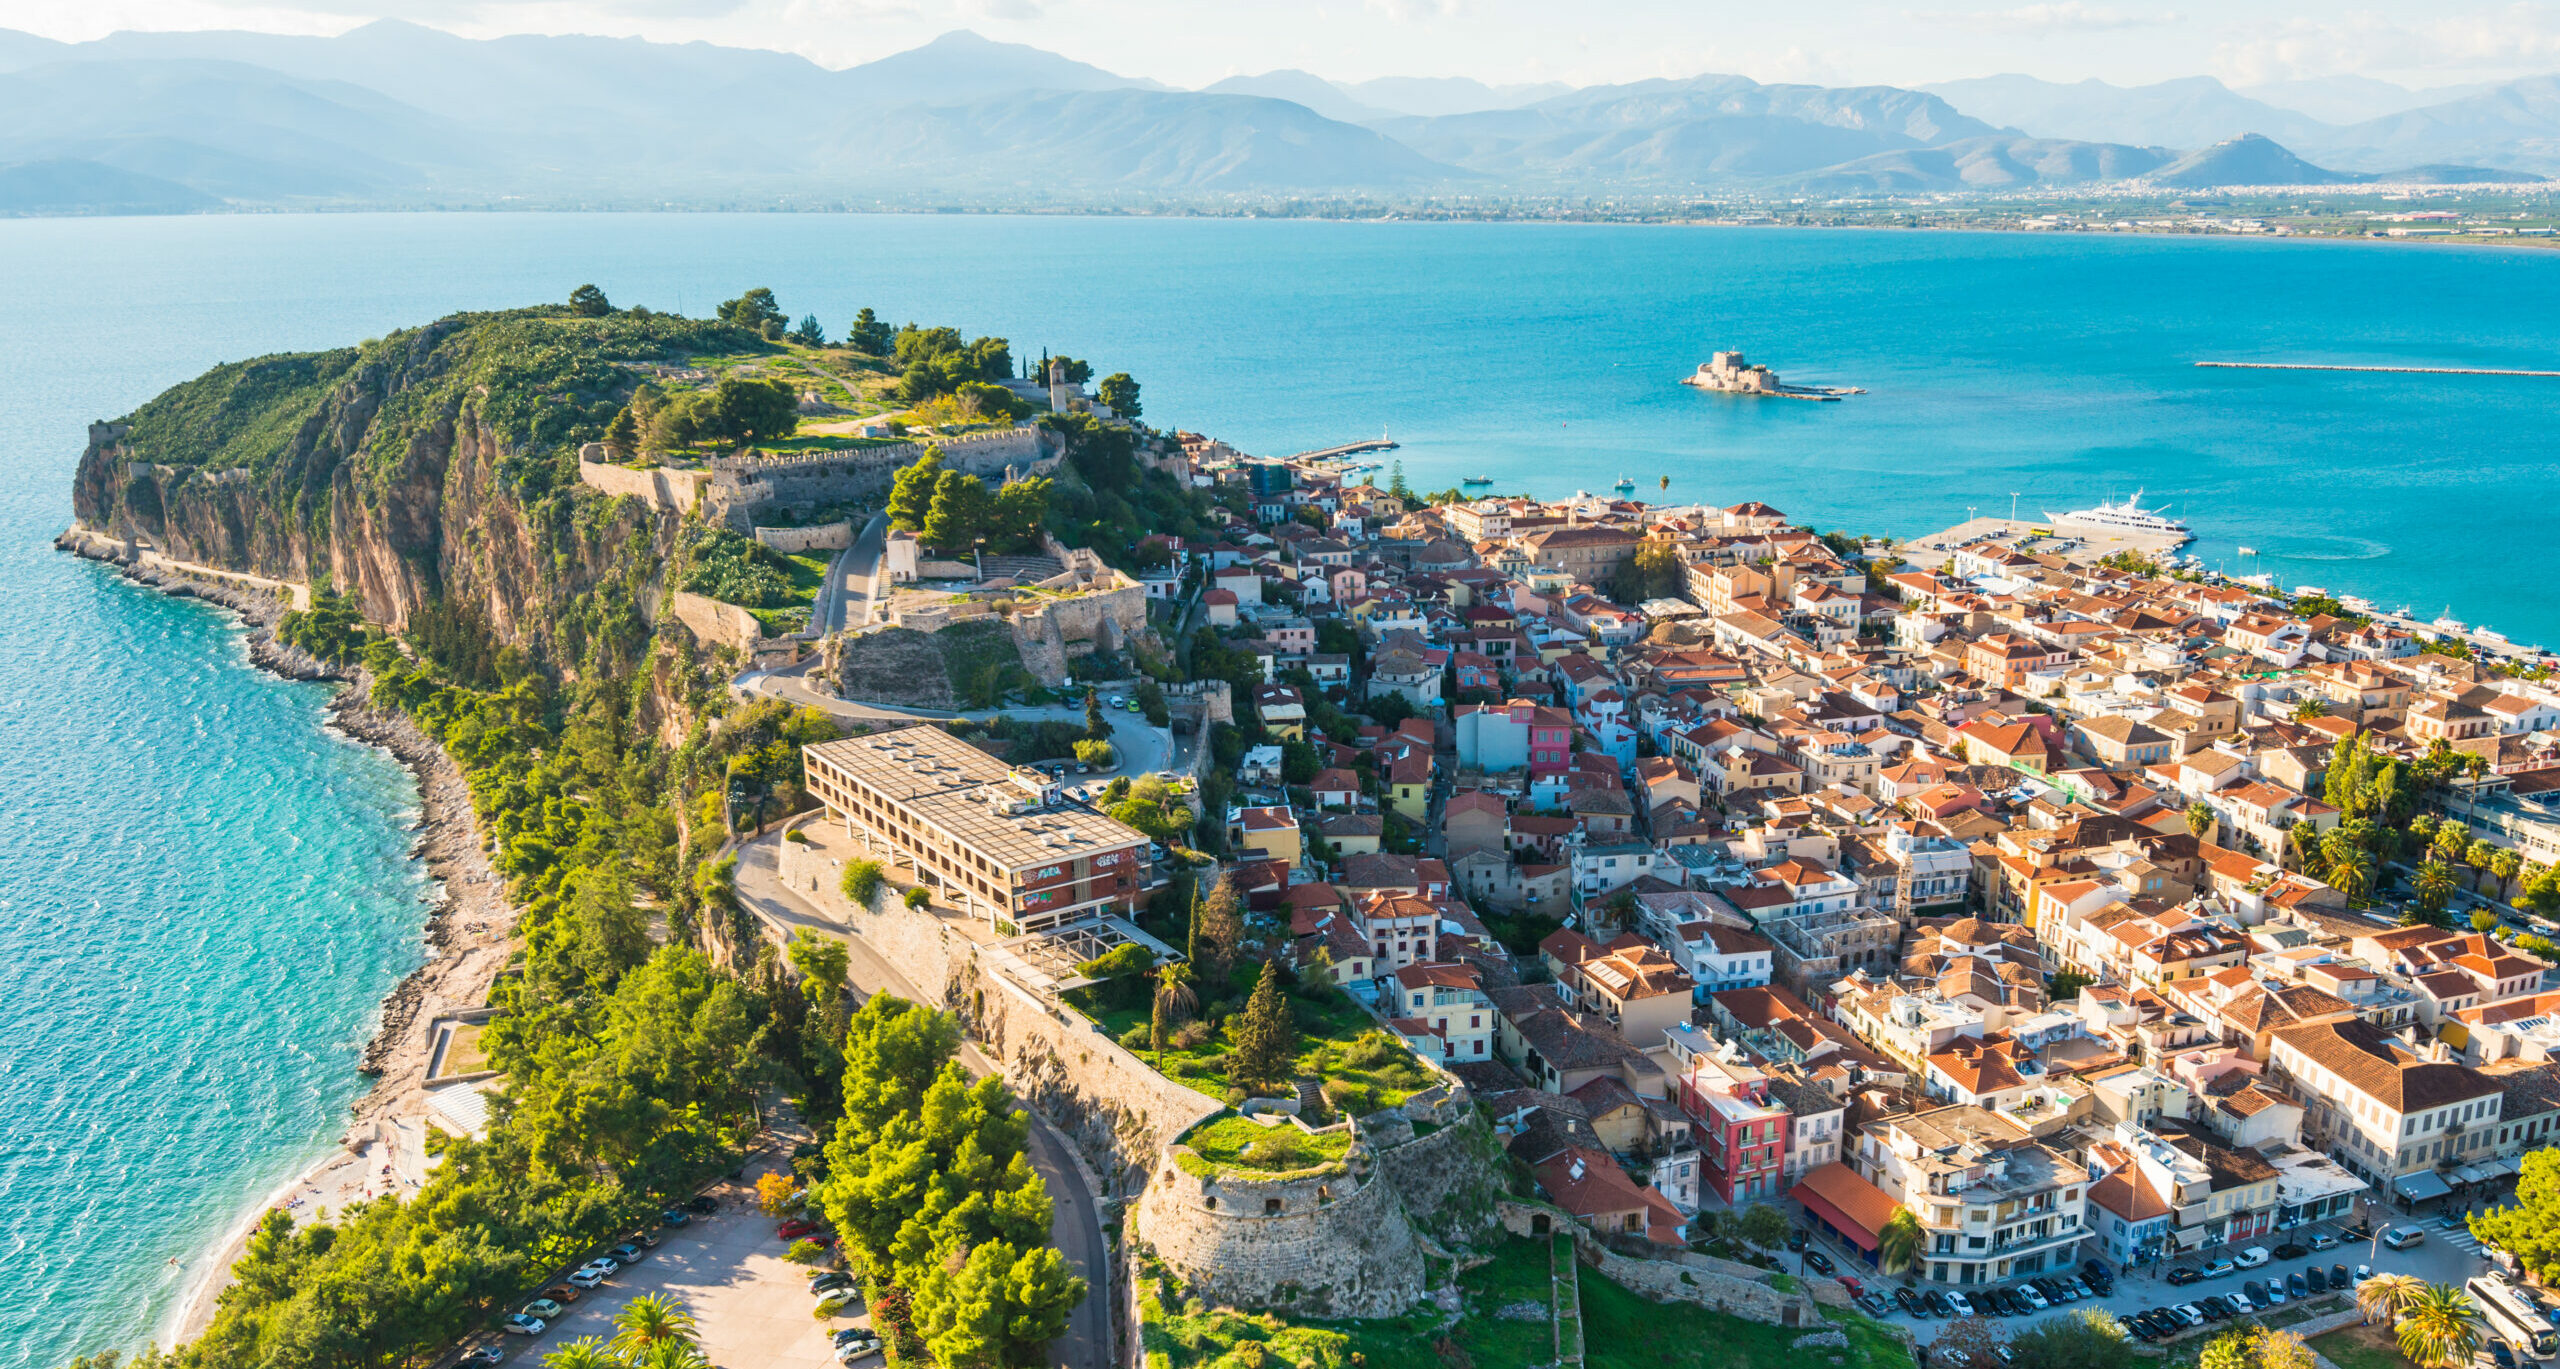 Nafplio: The picturesque old capital of Greece